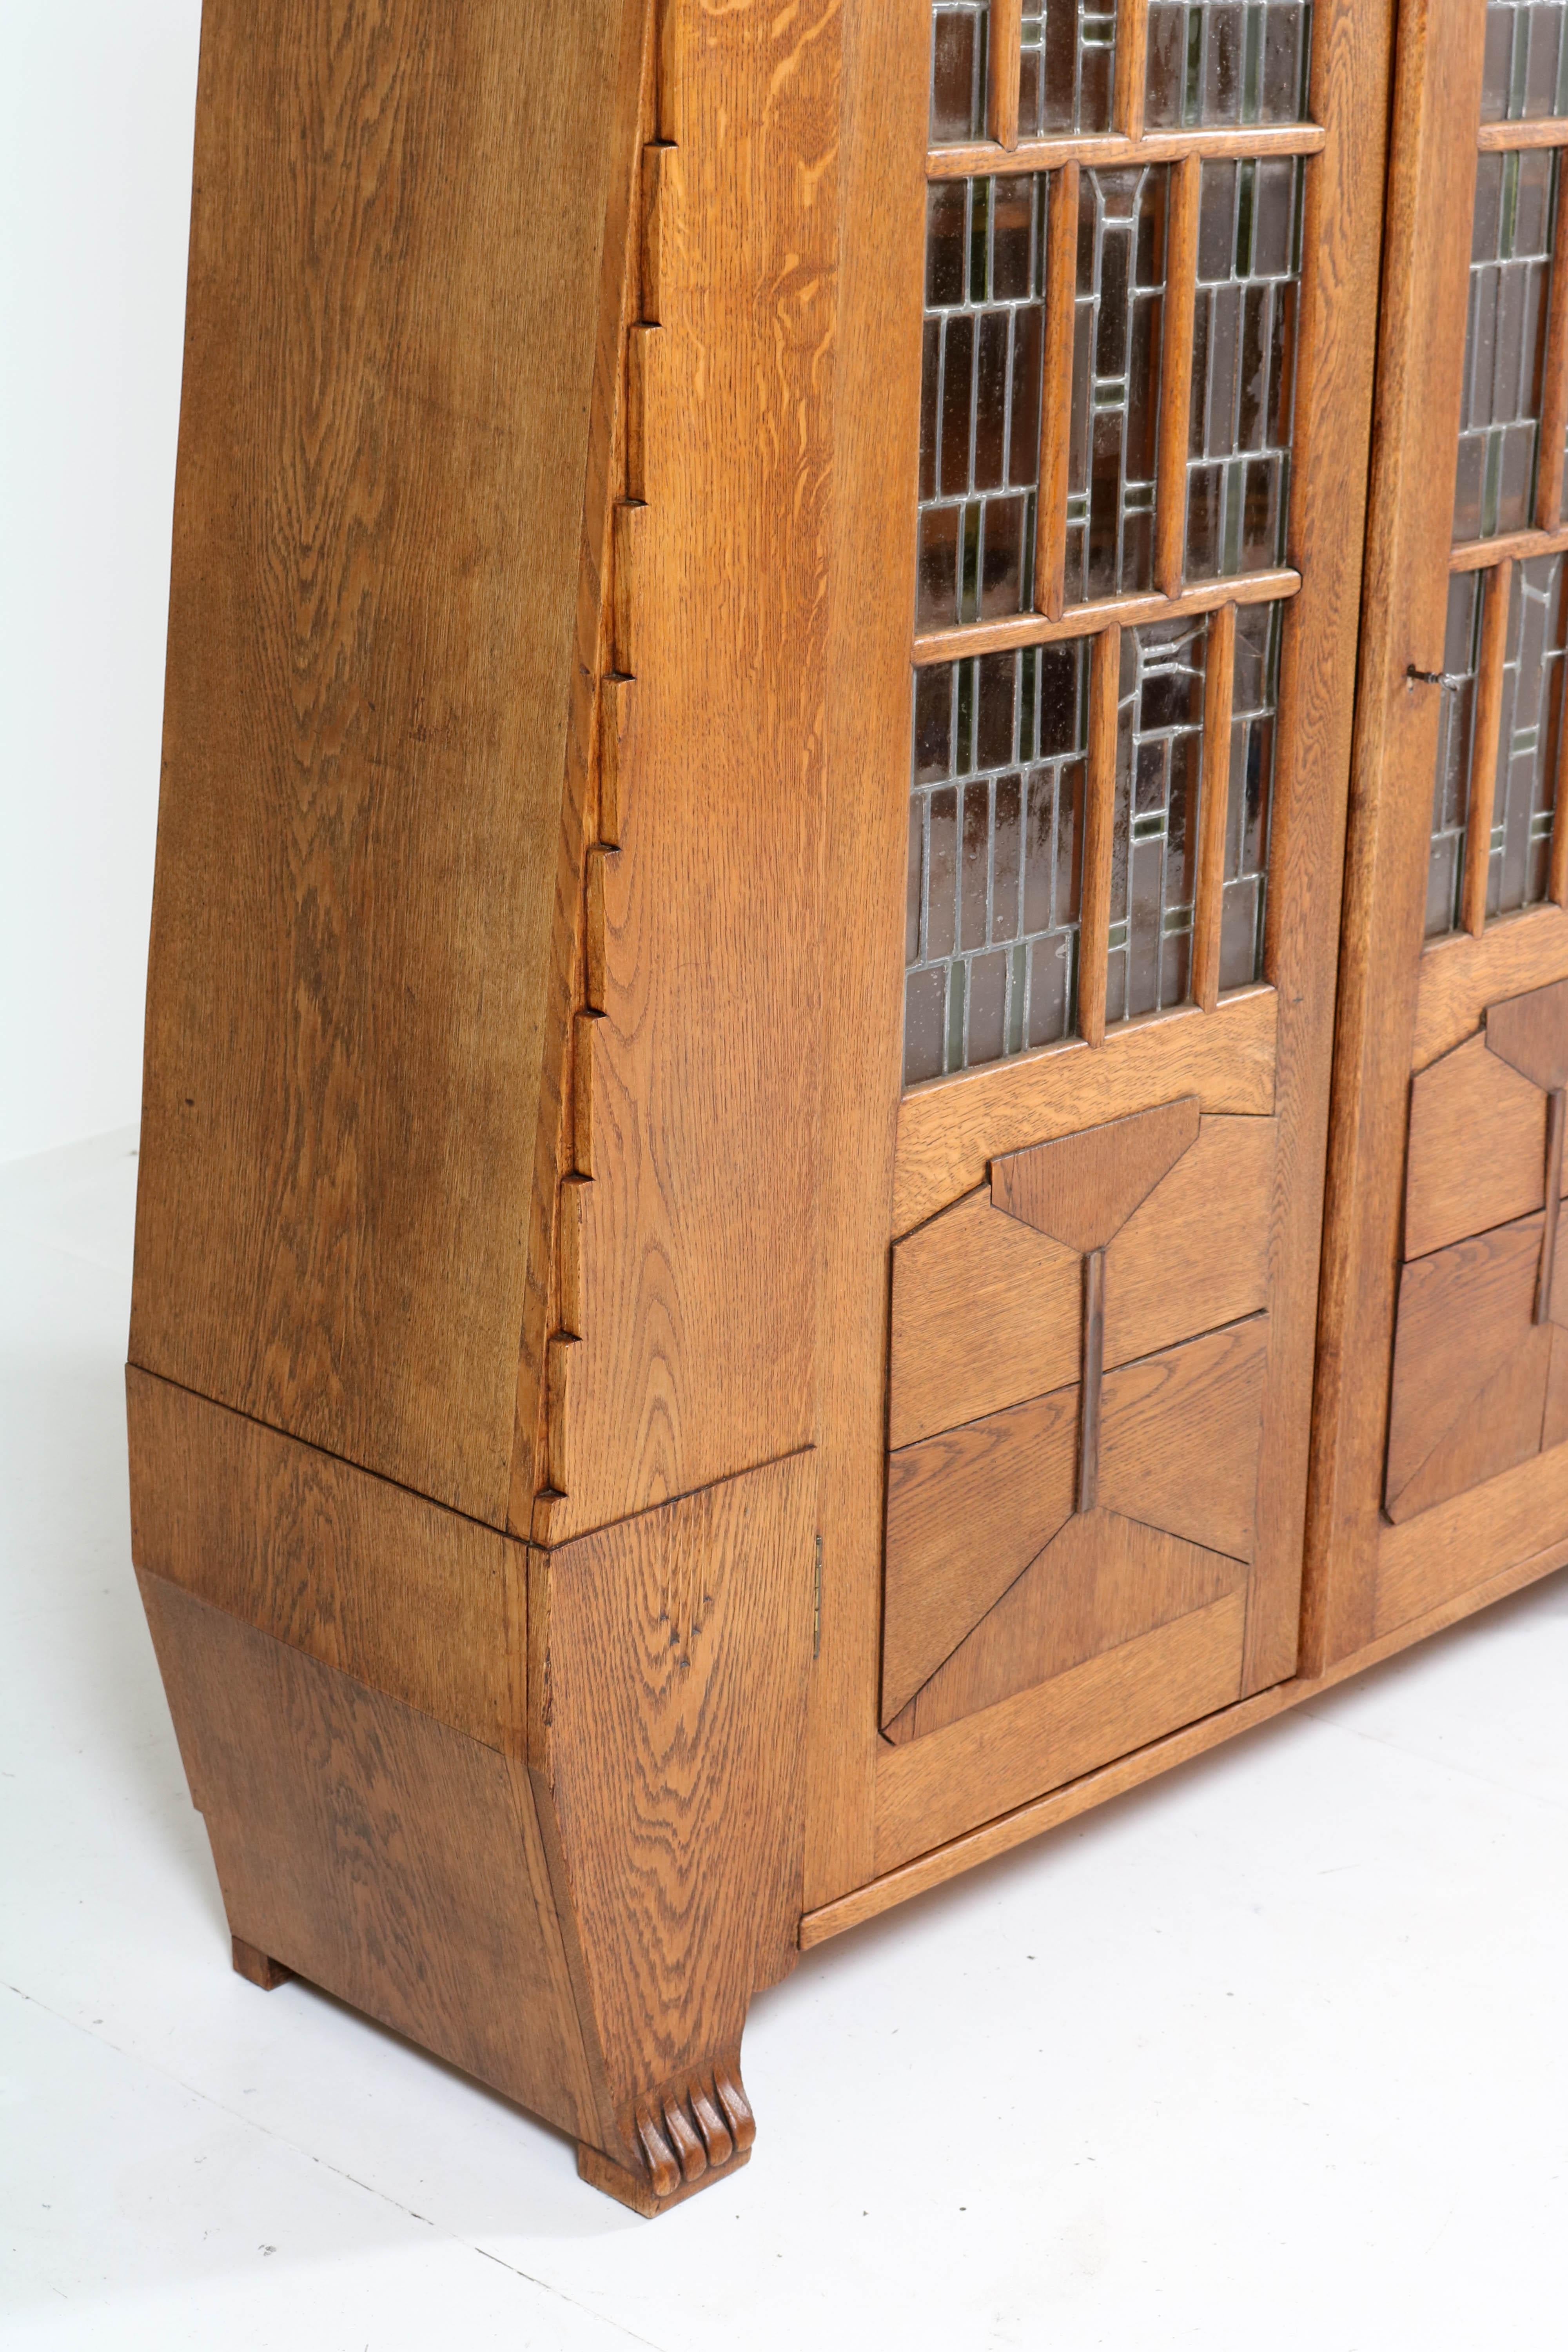 Oak Art Deco Amsterdam School Bookcase with Stained Glass by Hildo Krop, 1918 3